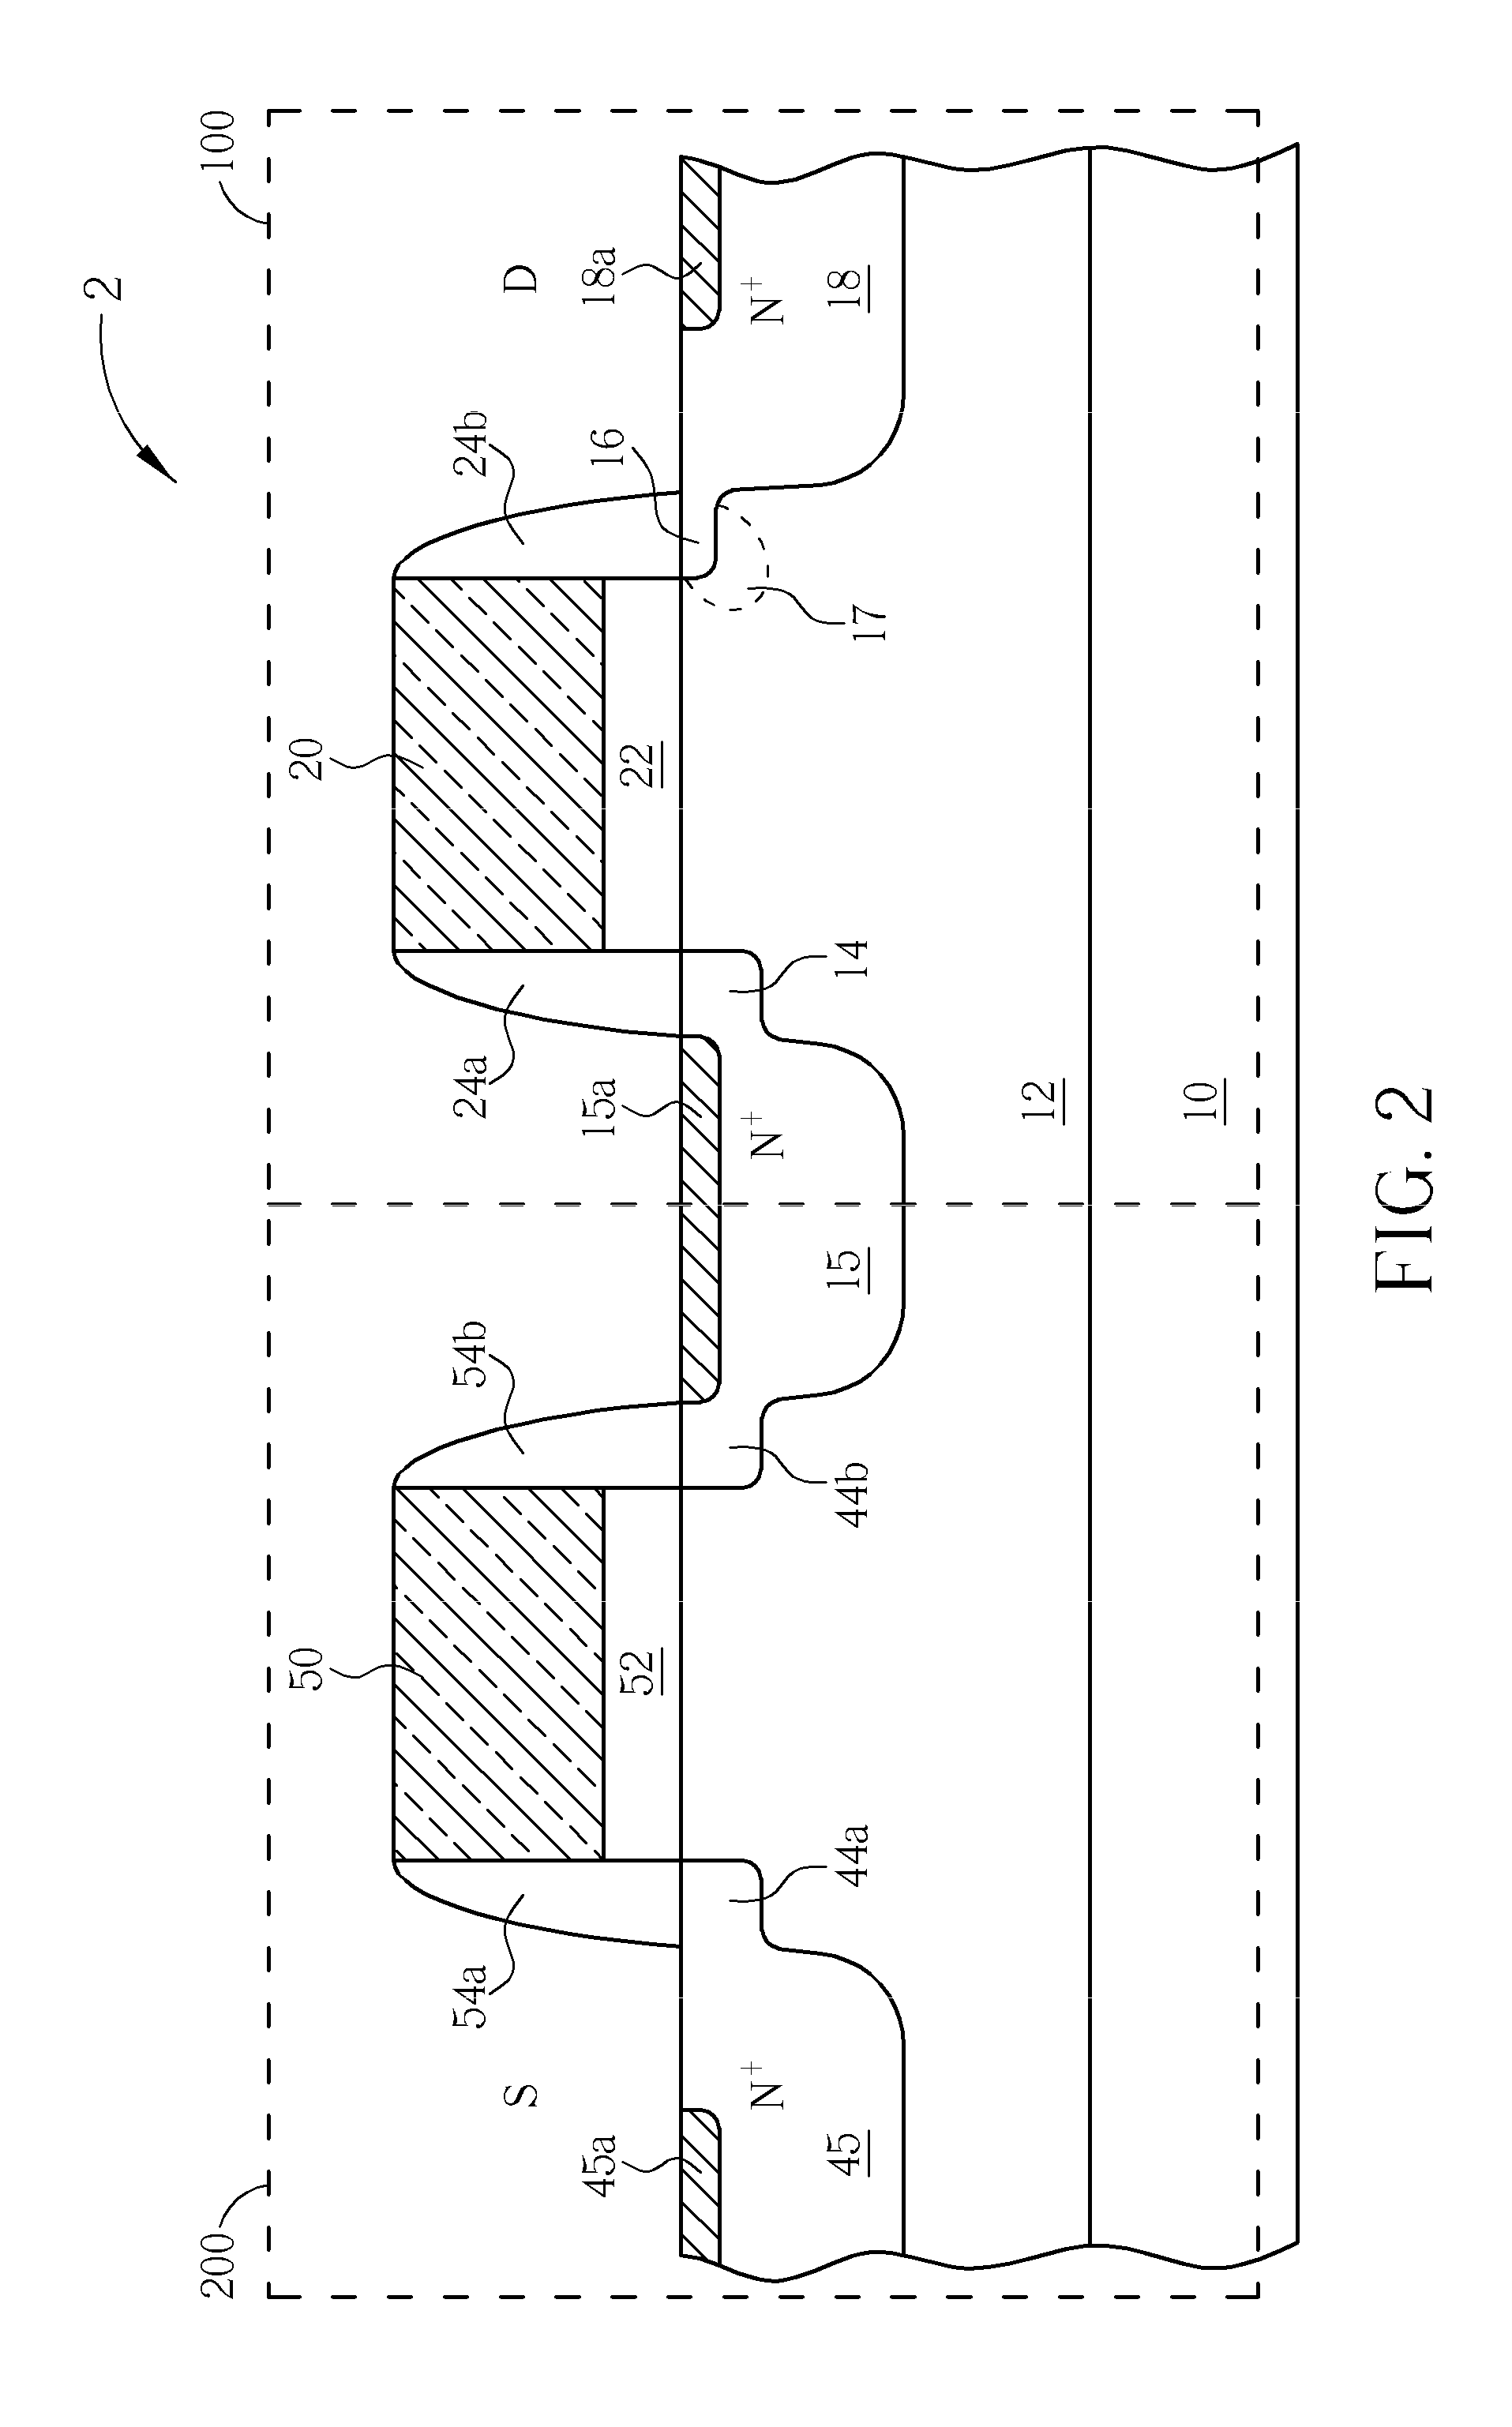 Input/output electrostatic discharge device with reduced junction breakdown voltage